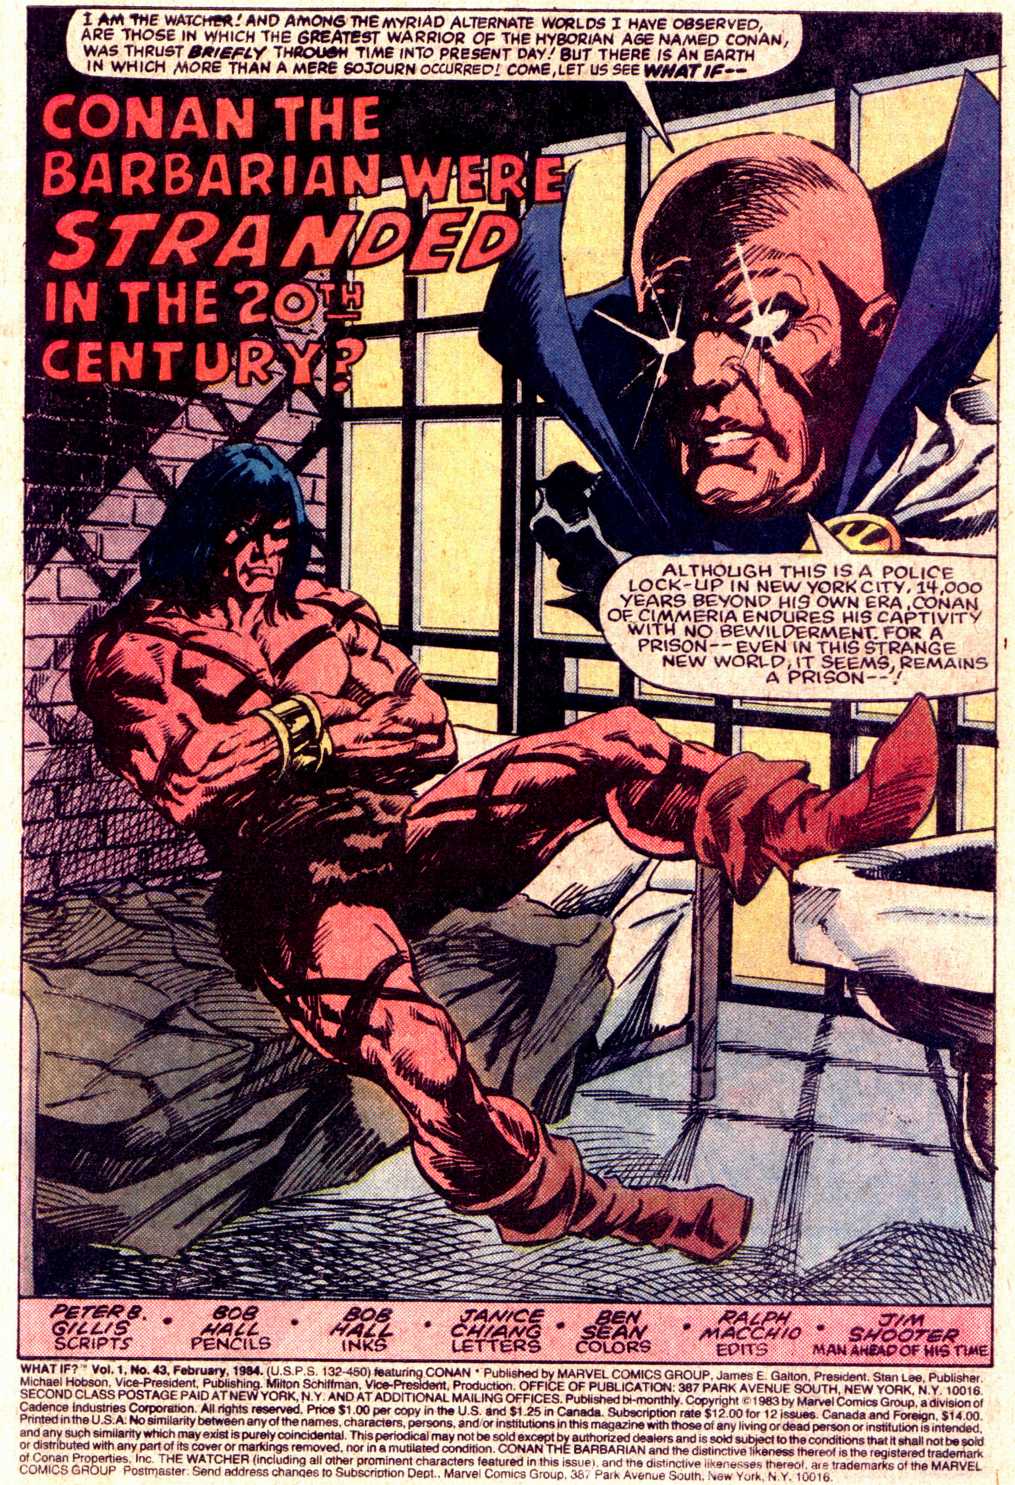 What If? (1977) issue 43 - Conan the Barbarian were stranded in the 20th century - Page 2